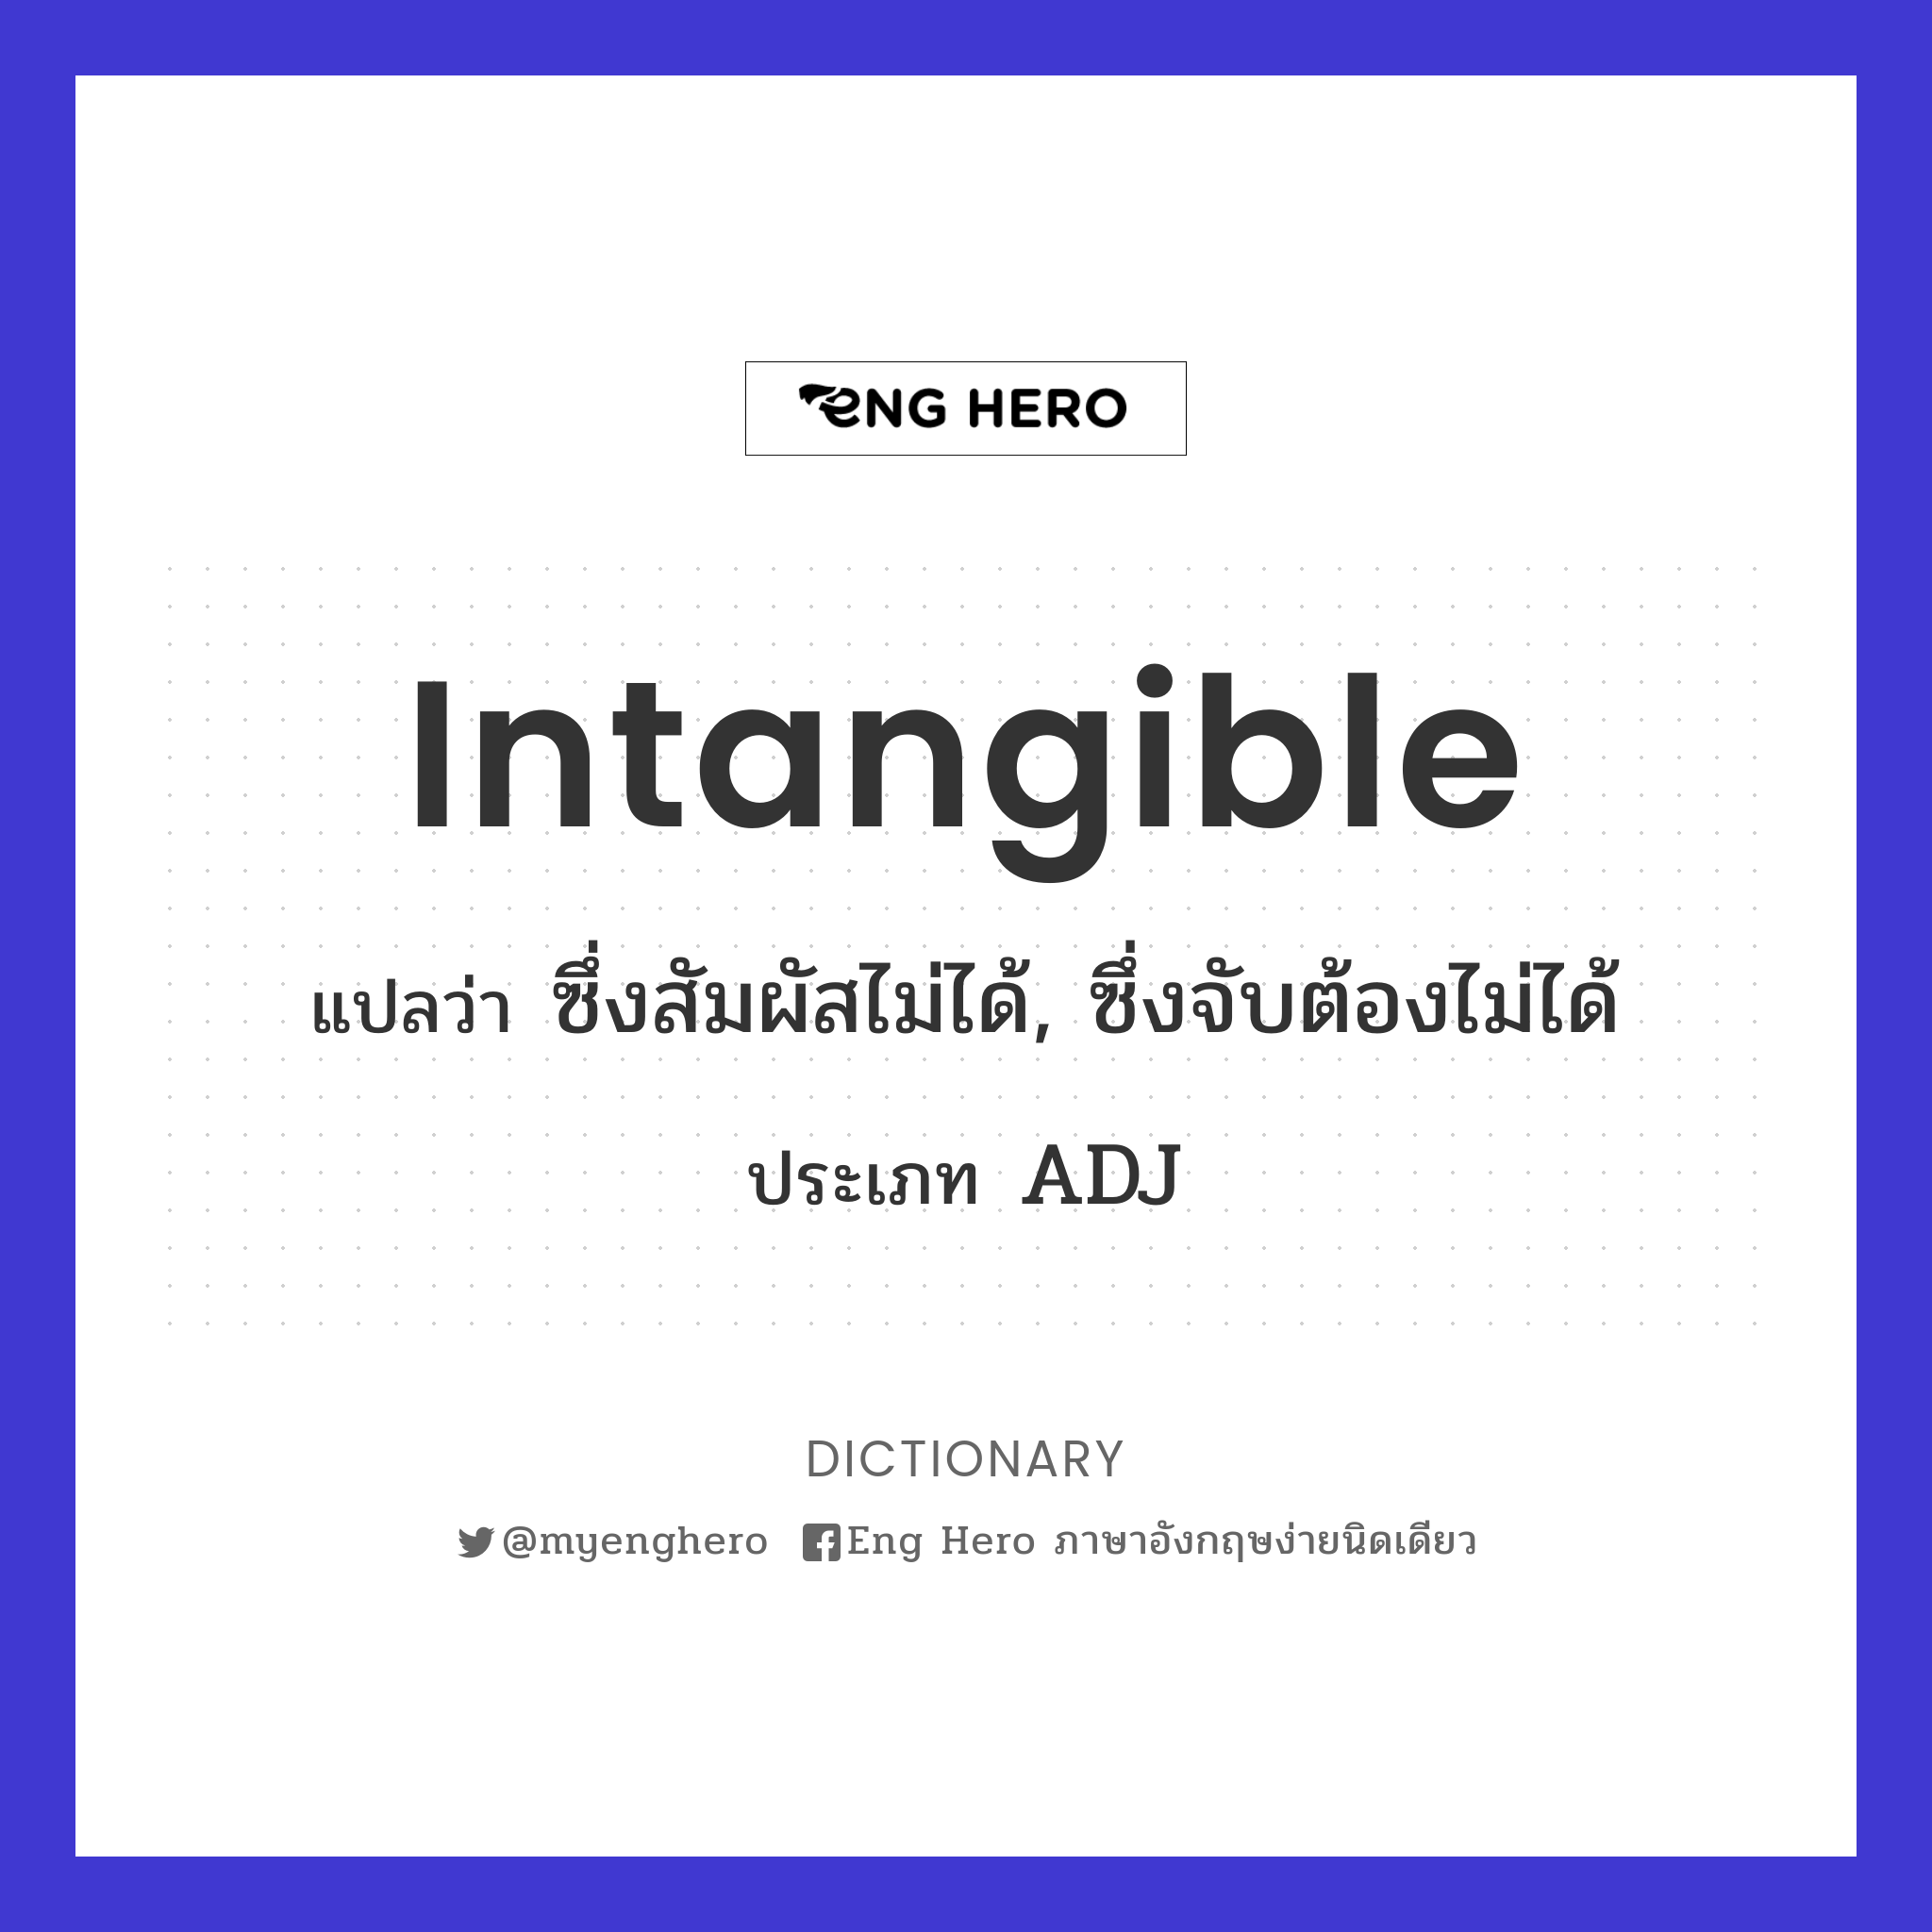 intangible